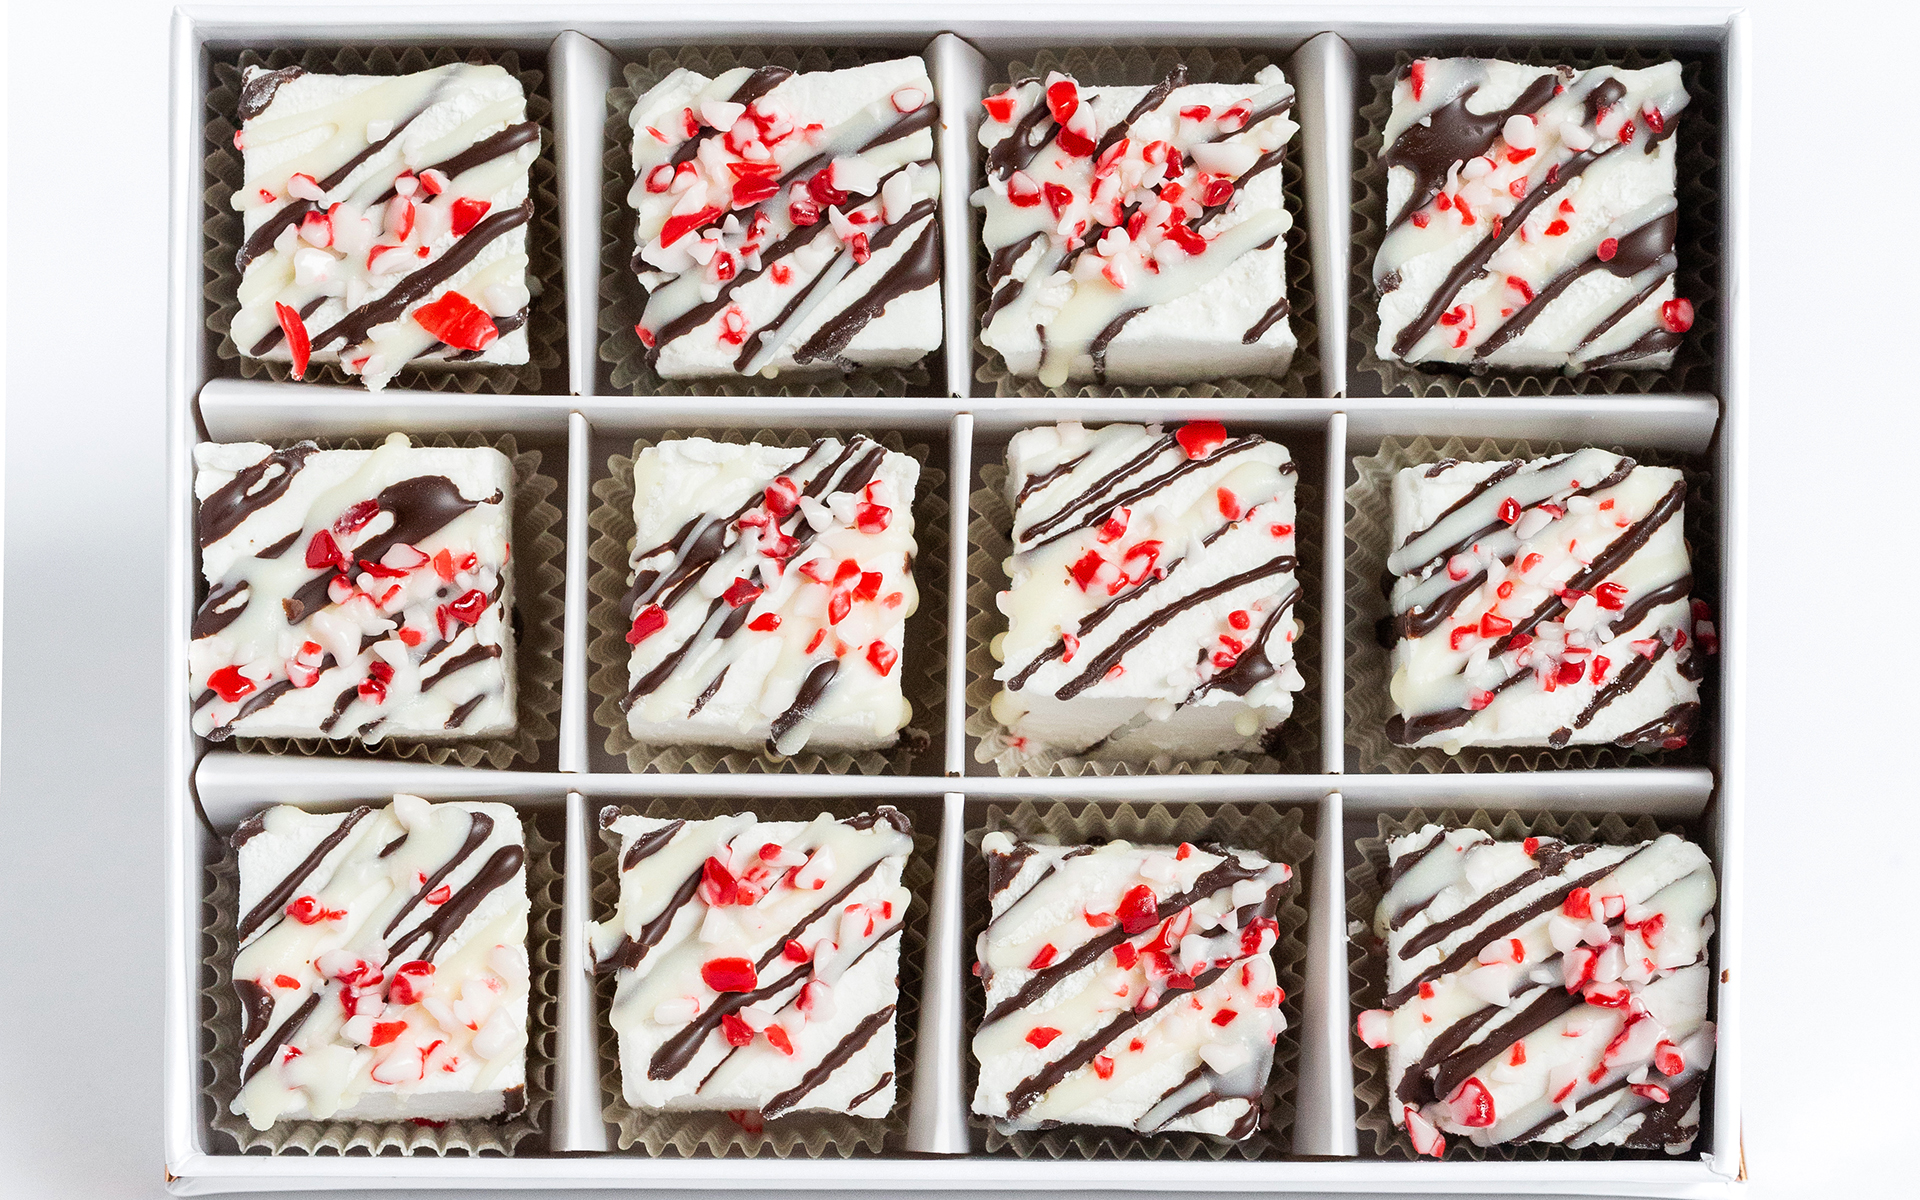 Peppermint and chocolate Mellows